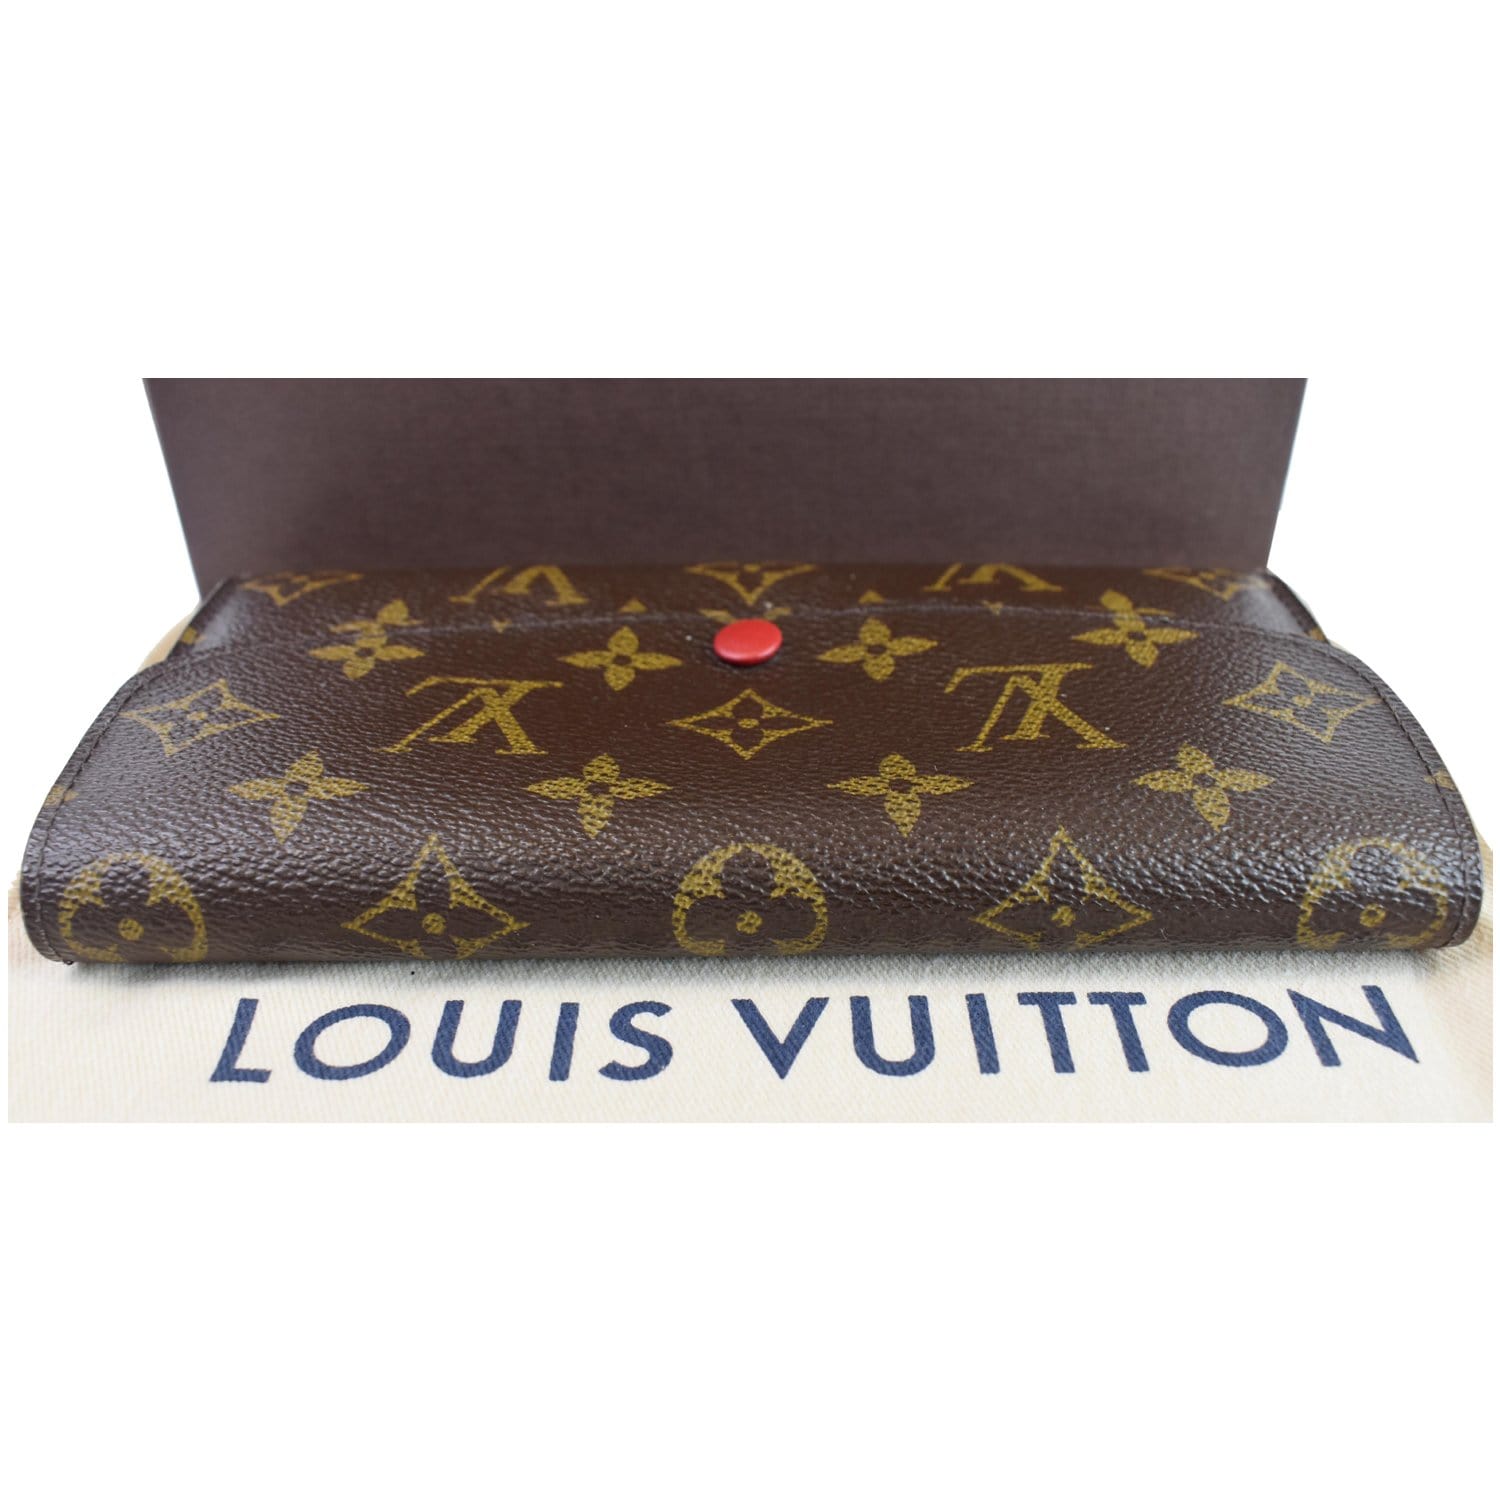 Louis Vuitton Wallet Emilie Damier Ebene Brown in Canvas with Gold